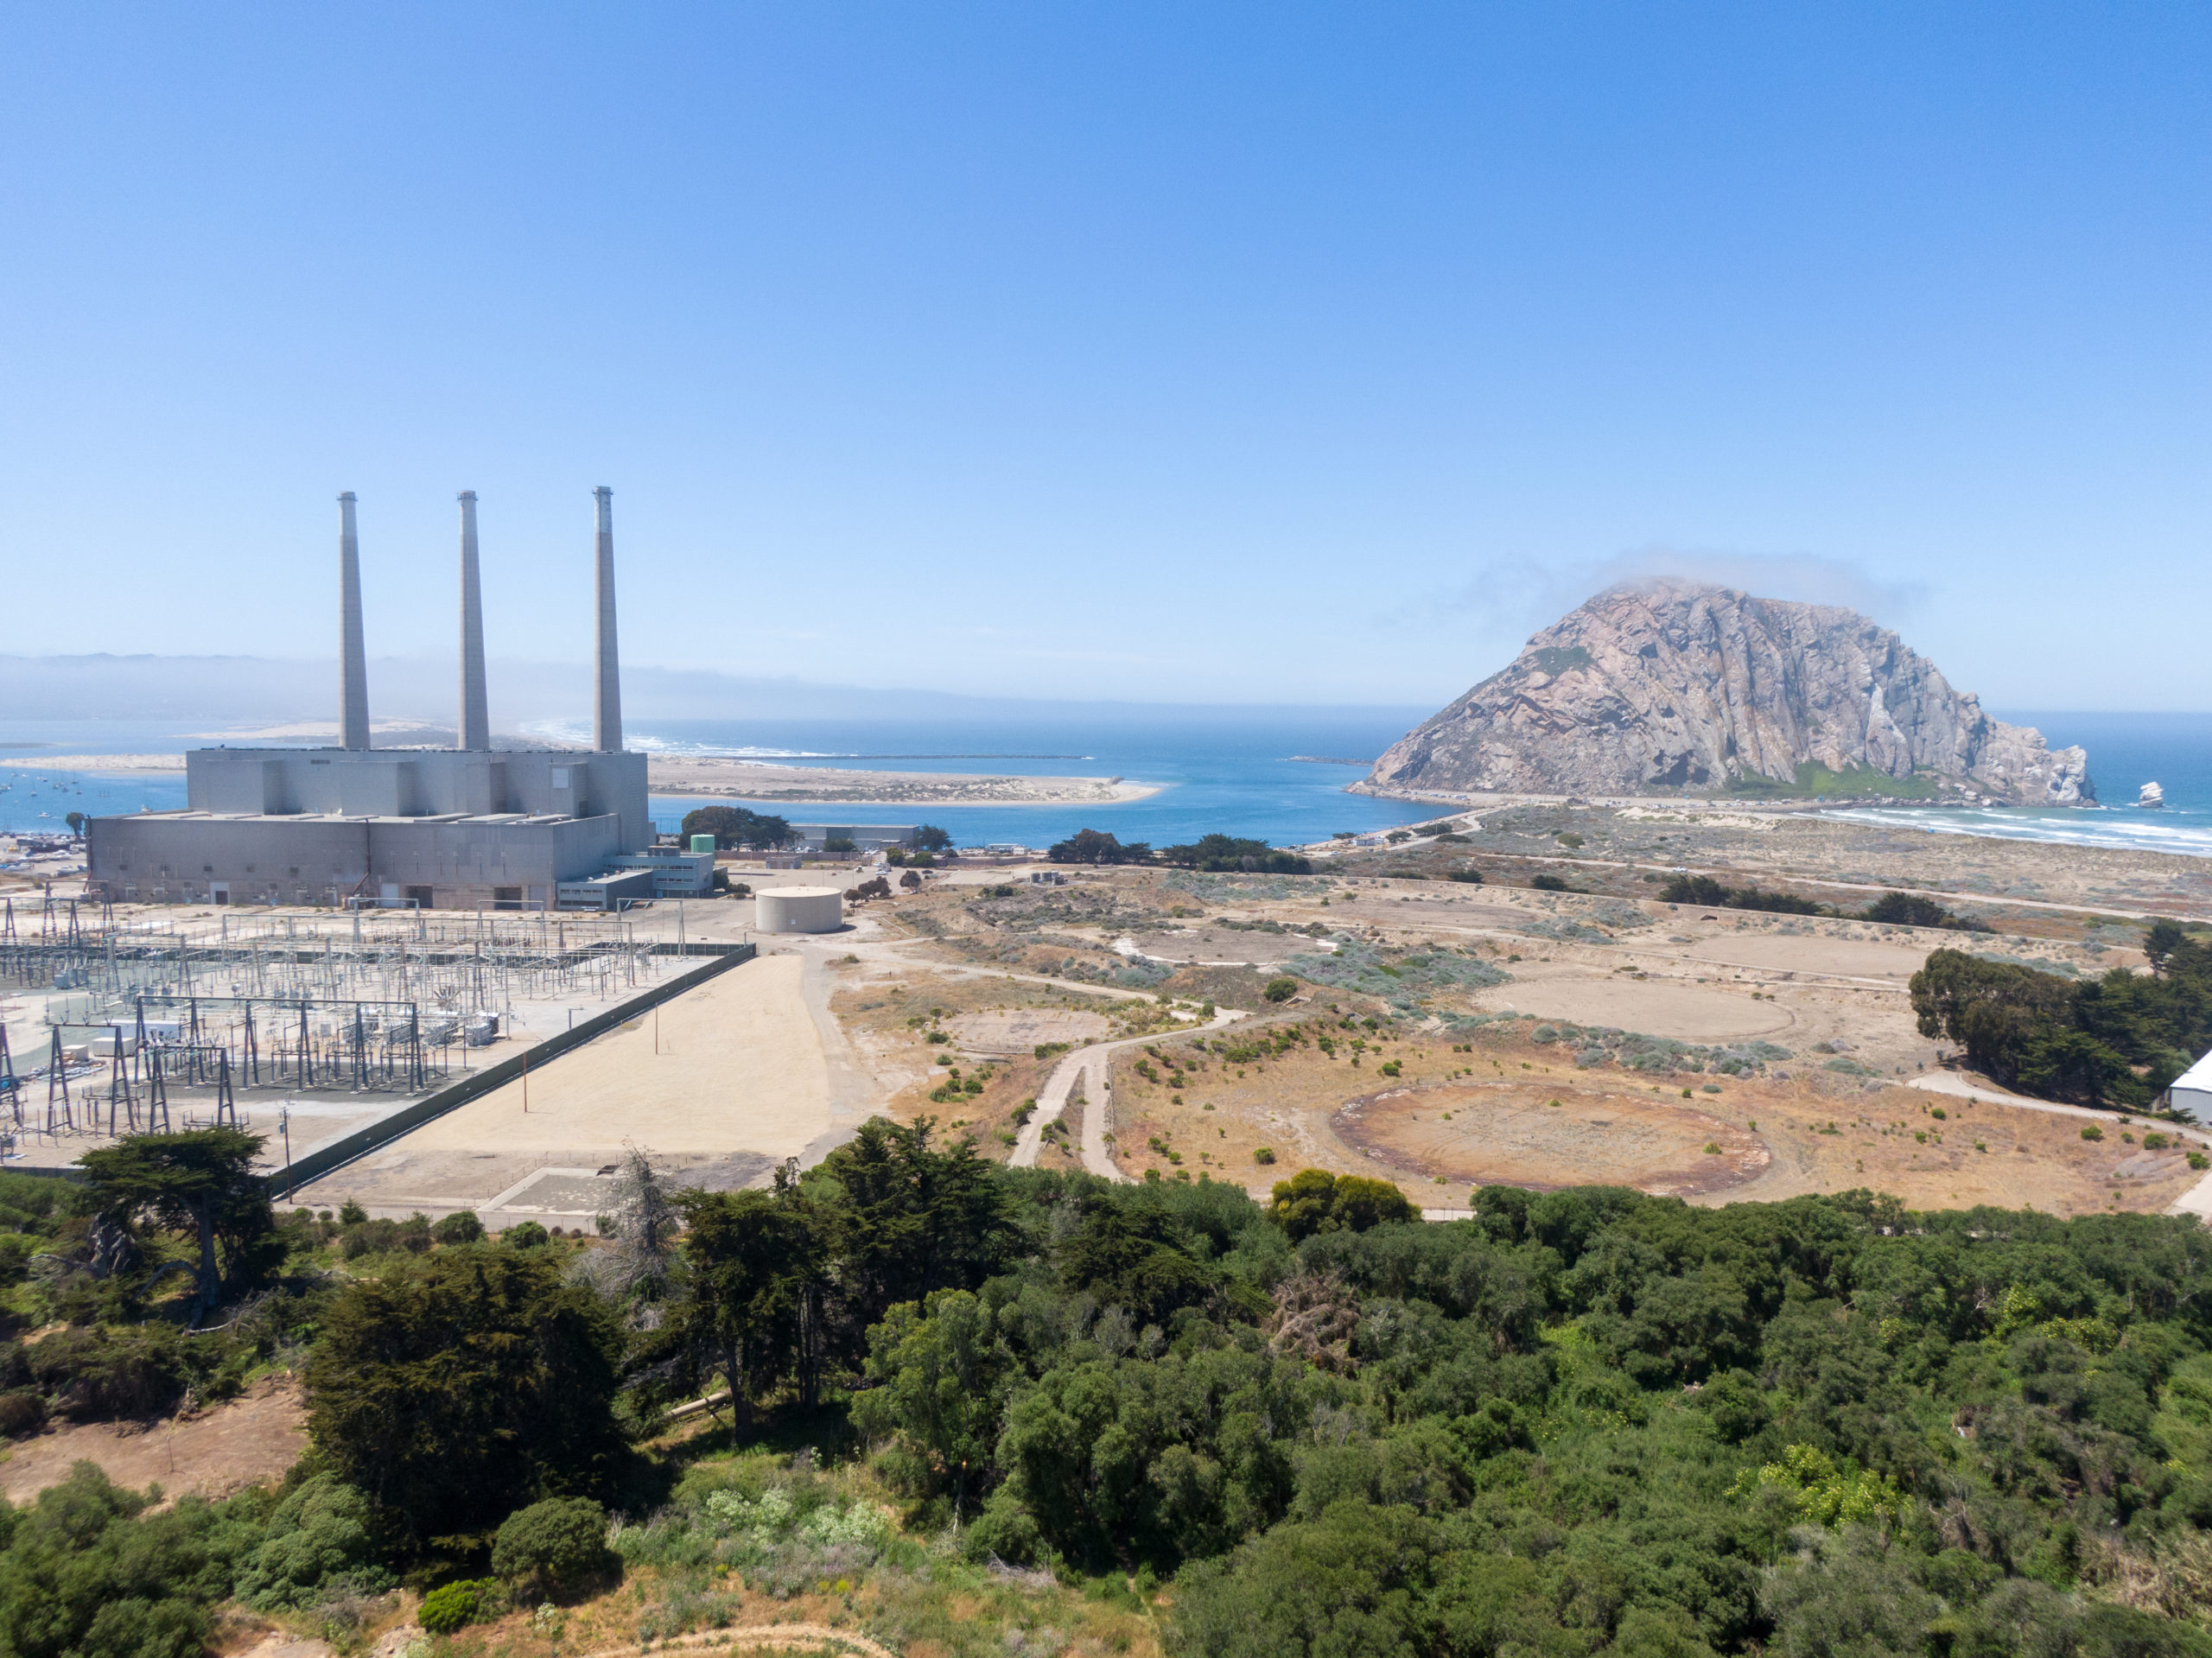 Get the Facts About Vistra's Proposed Battery Storage Project in Morro Bay